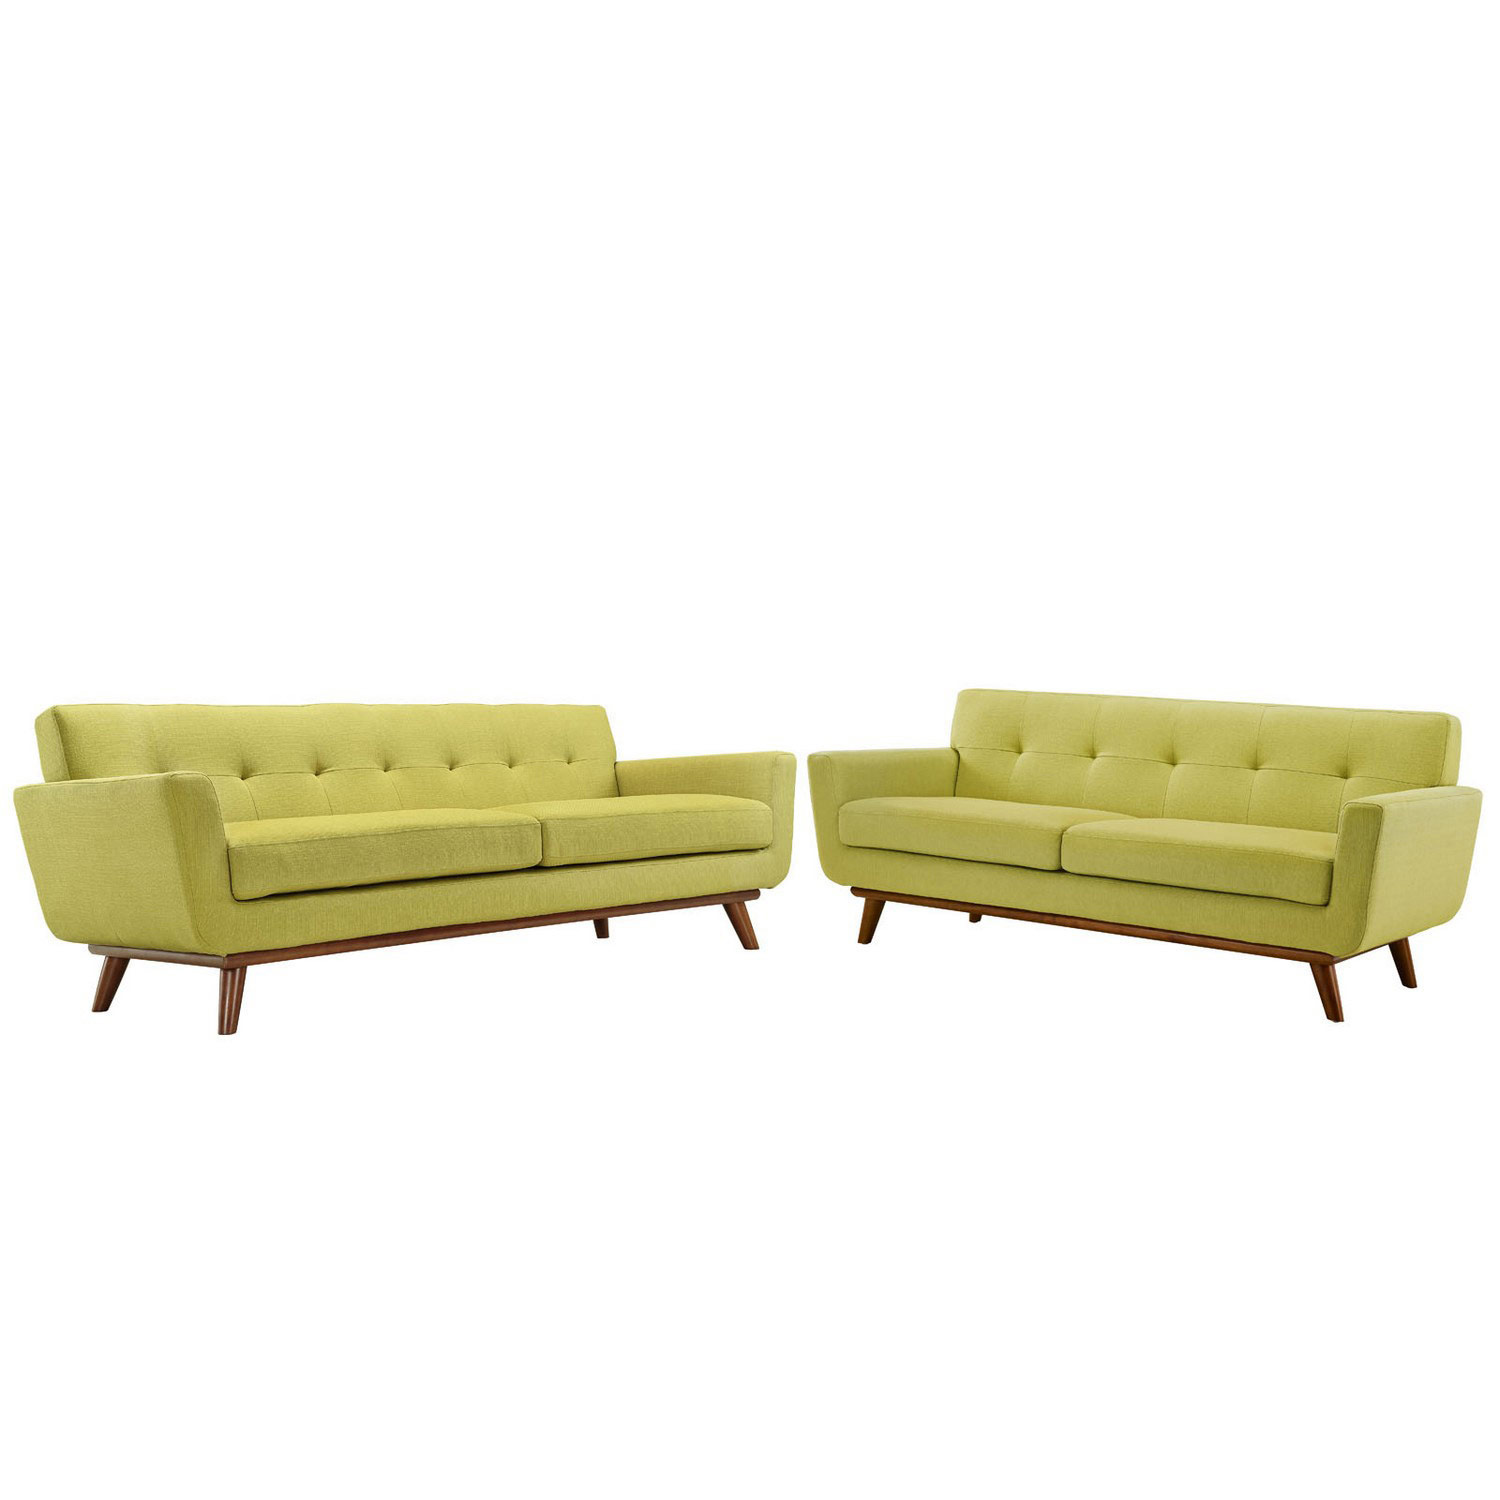 Modway Engage Loveseat and Sofa Set of 2 - Wheat